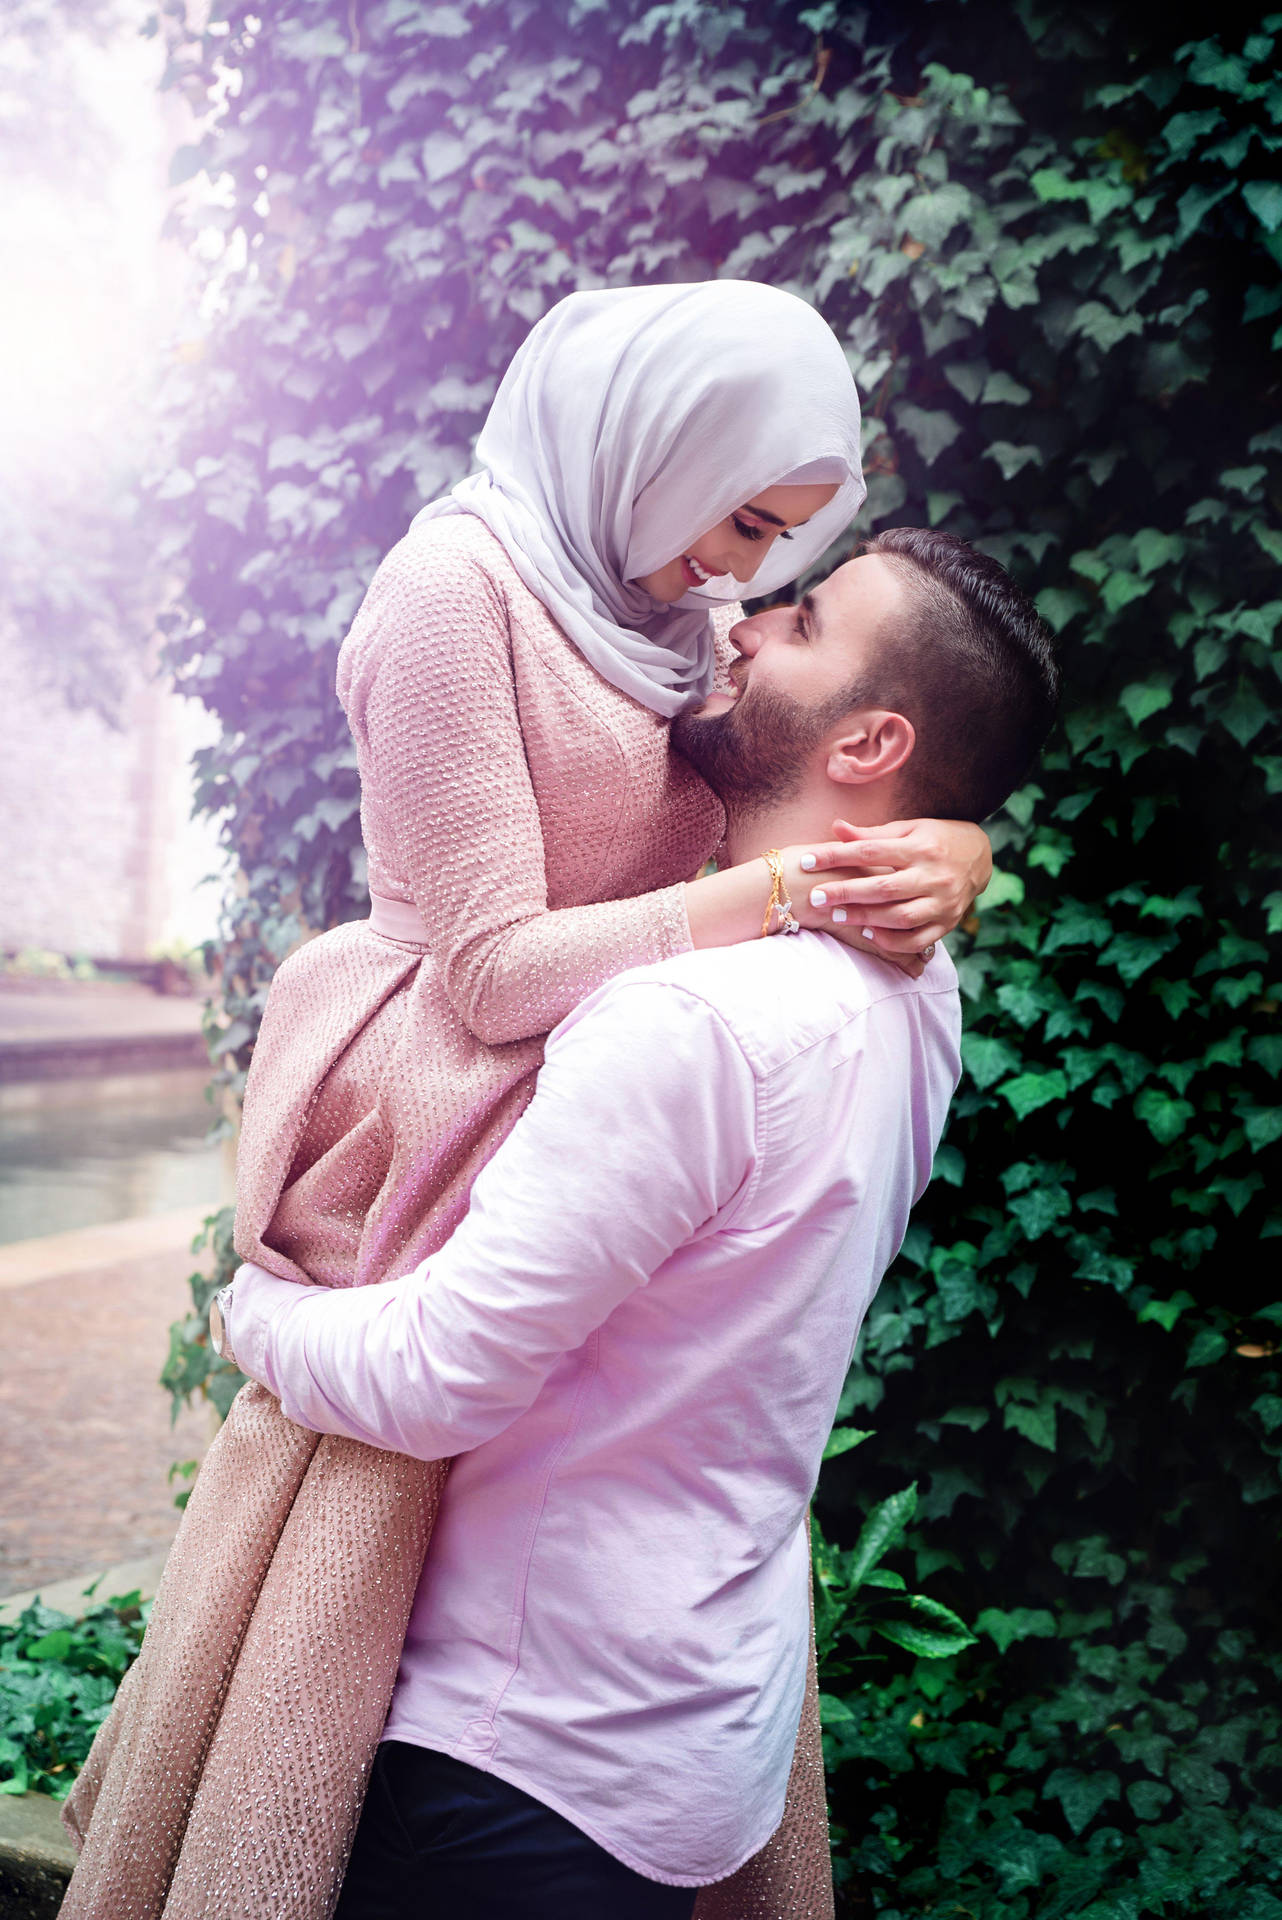 Free Muslim Couple Wallpaper Downloads, [100+] Muslim Couple Wallpapers for  FREE 